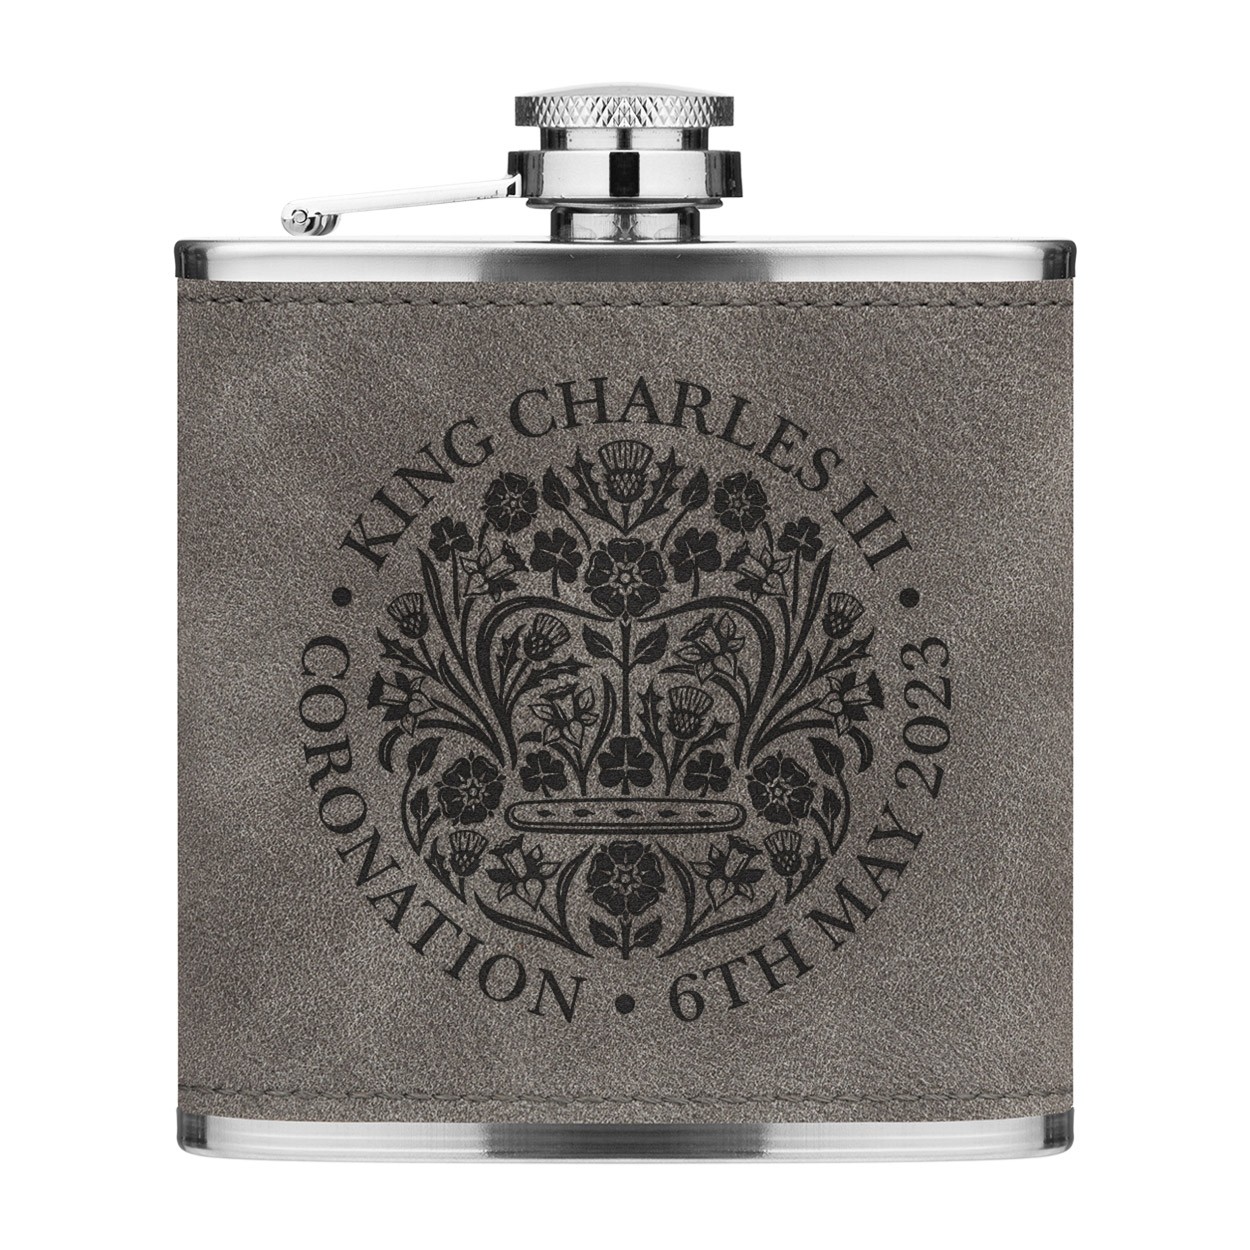 Coronation Emblem King Charles III 6oz PU Leather Hip Flask Grey Luxe King's Coronation Commemorative Souvenir Gift His Majesty 6th May 2023